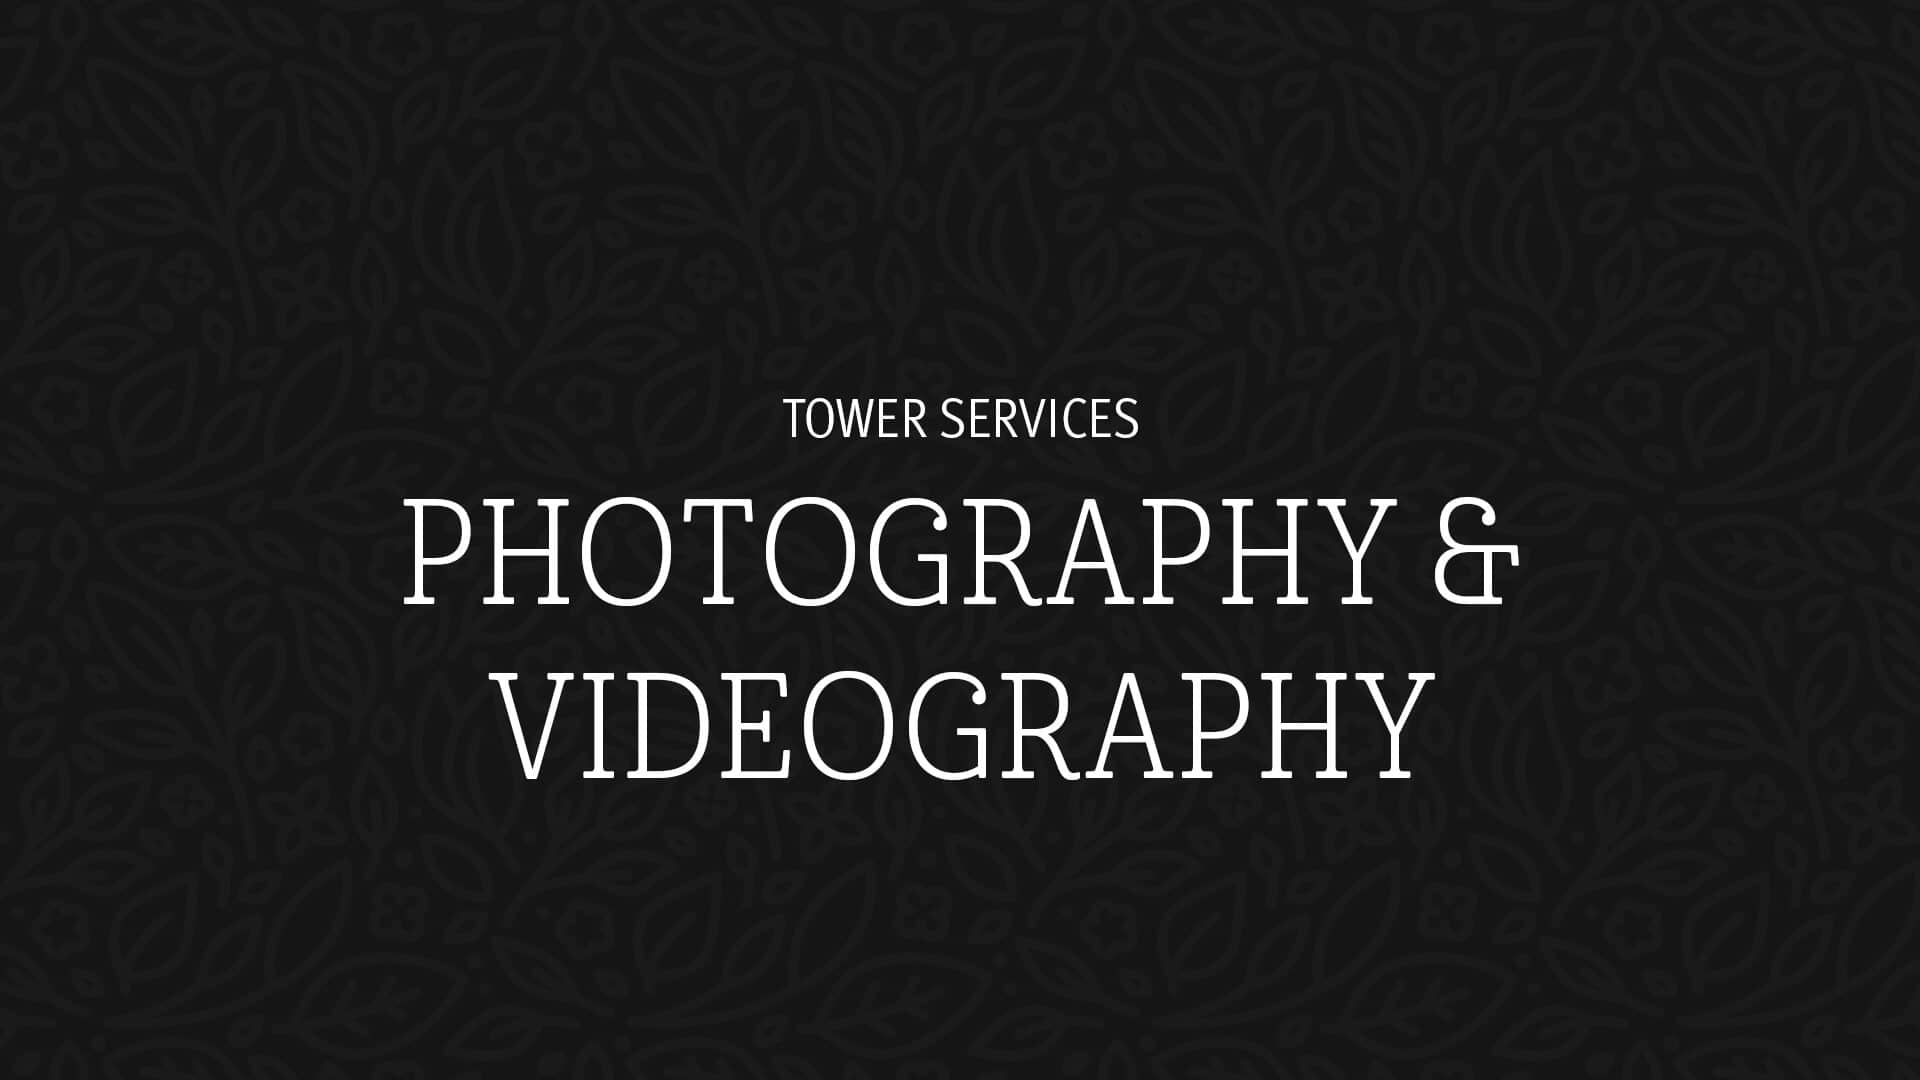 tower marketing photography & videography services